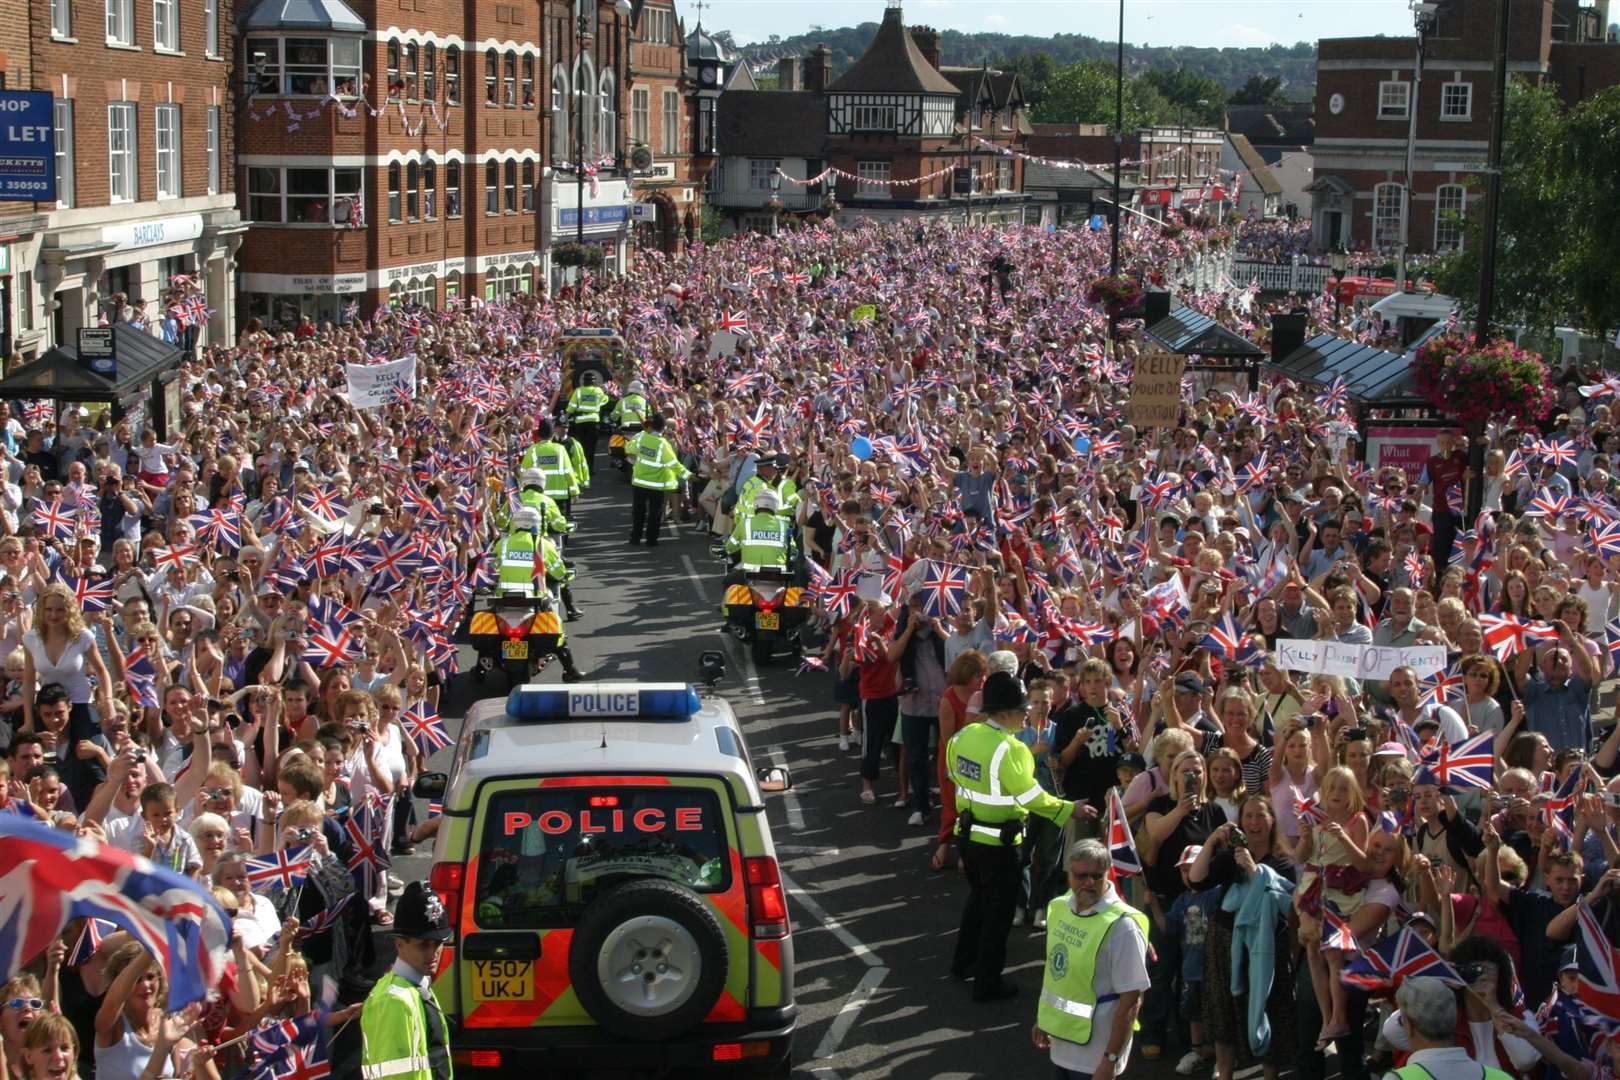 Huge crowds turned out in Tonbridge to greet Olympic hero Kelly Holmes in 2004